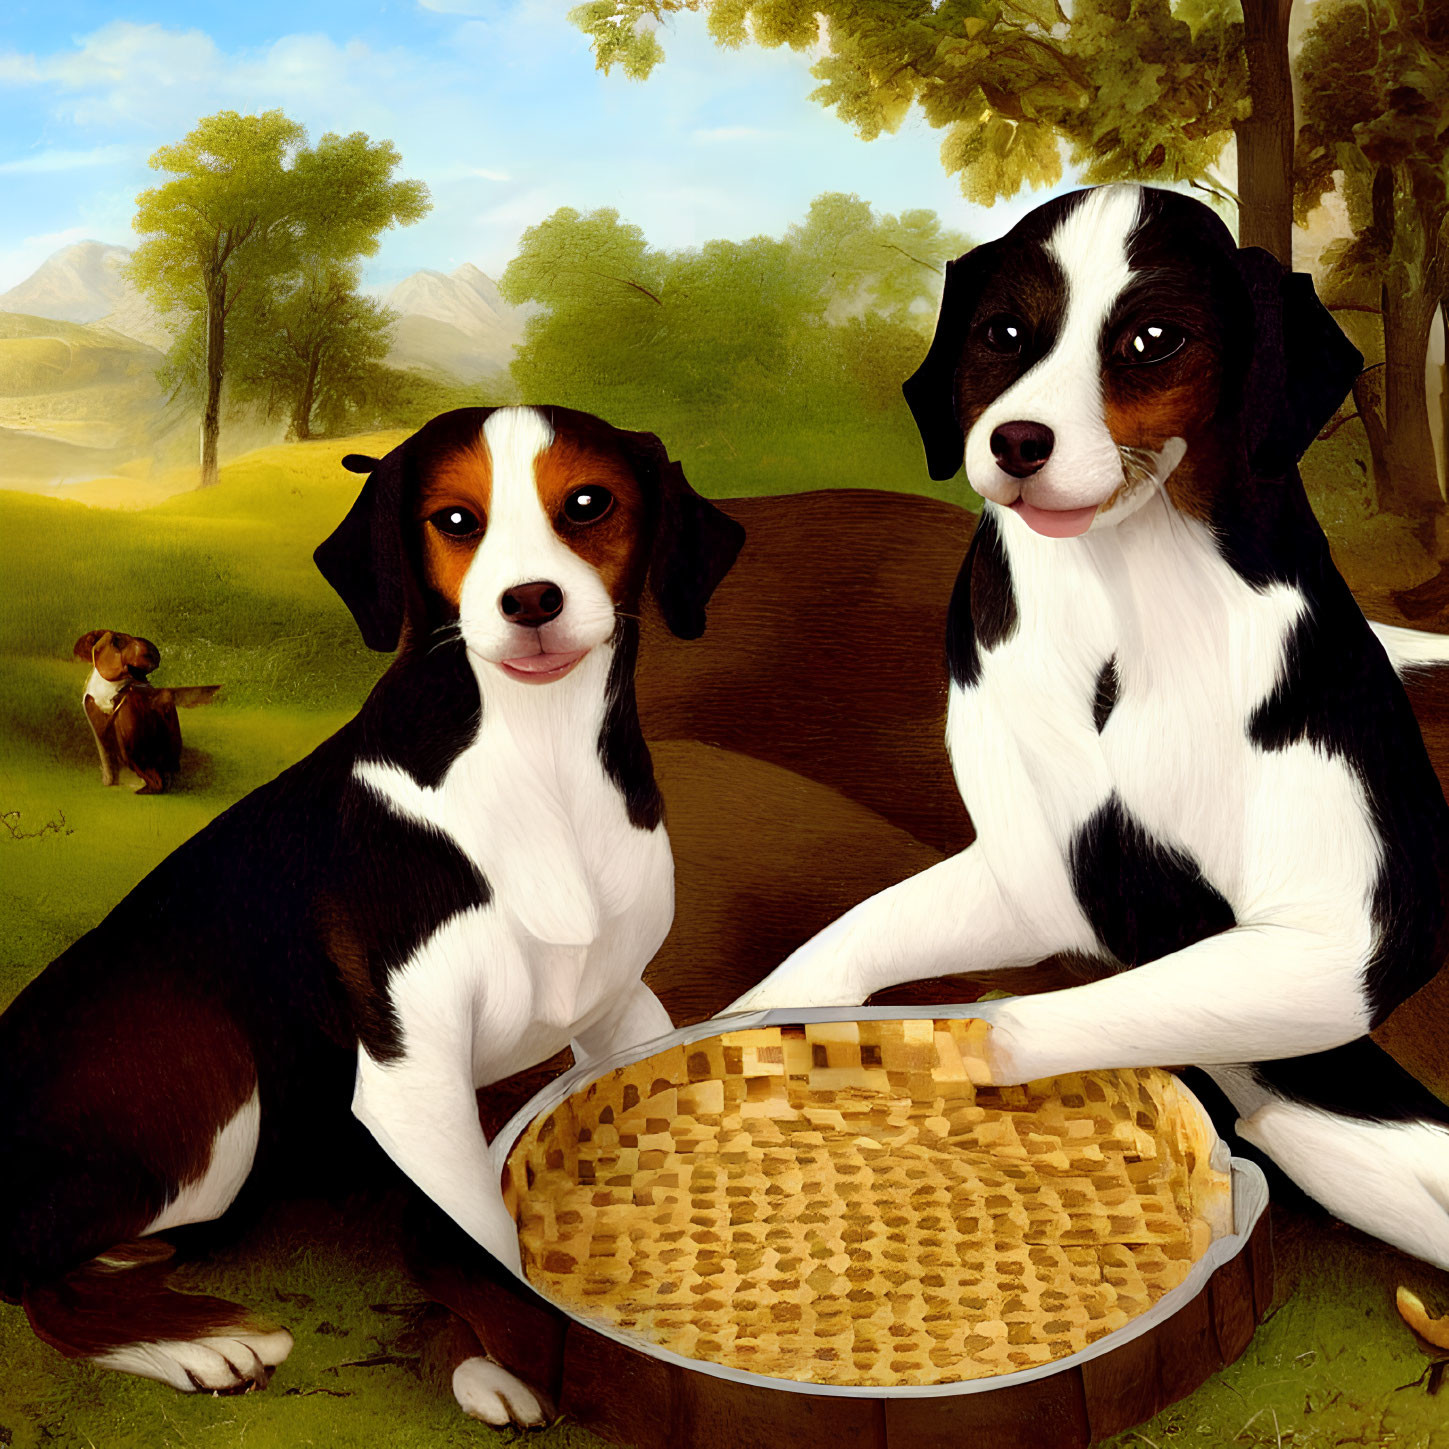 White and brown spotted dogs playing checkers on grass with pastoral landscape and another dog in background.